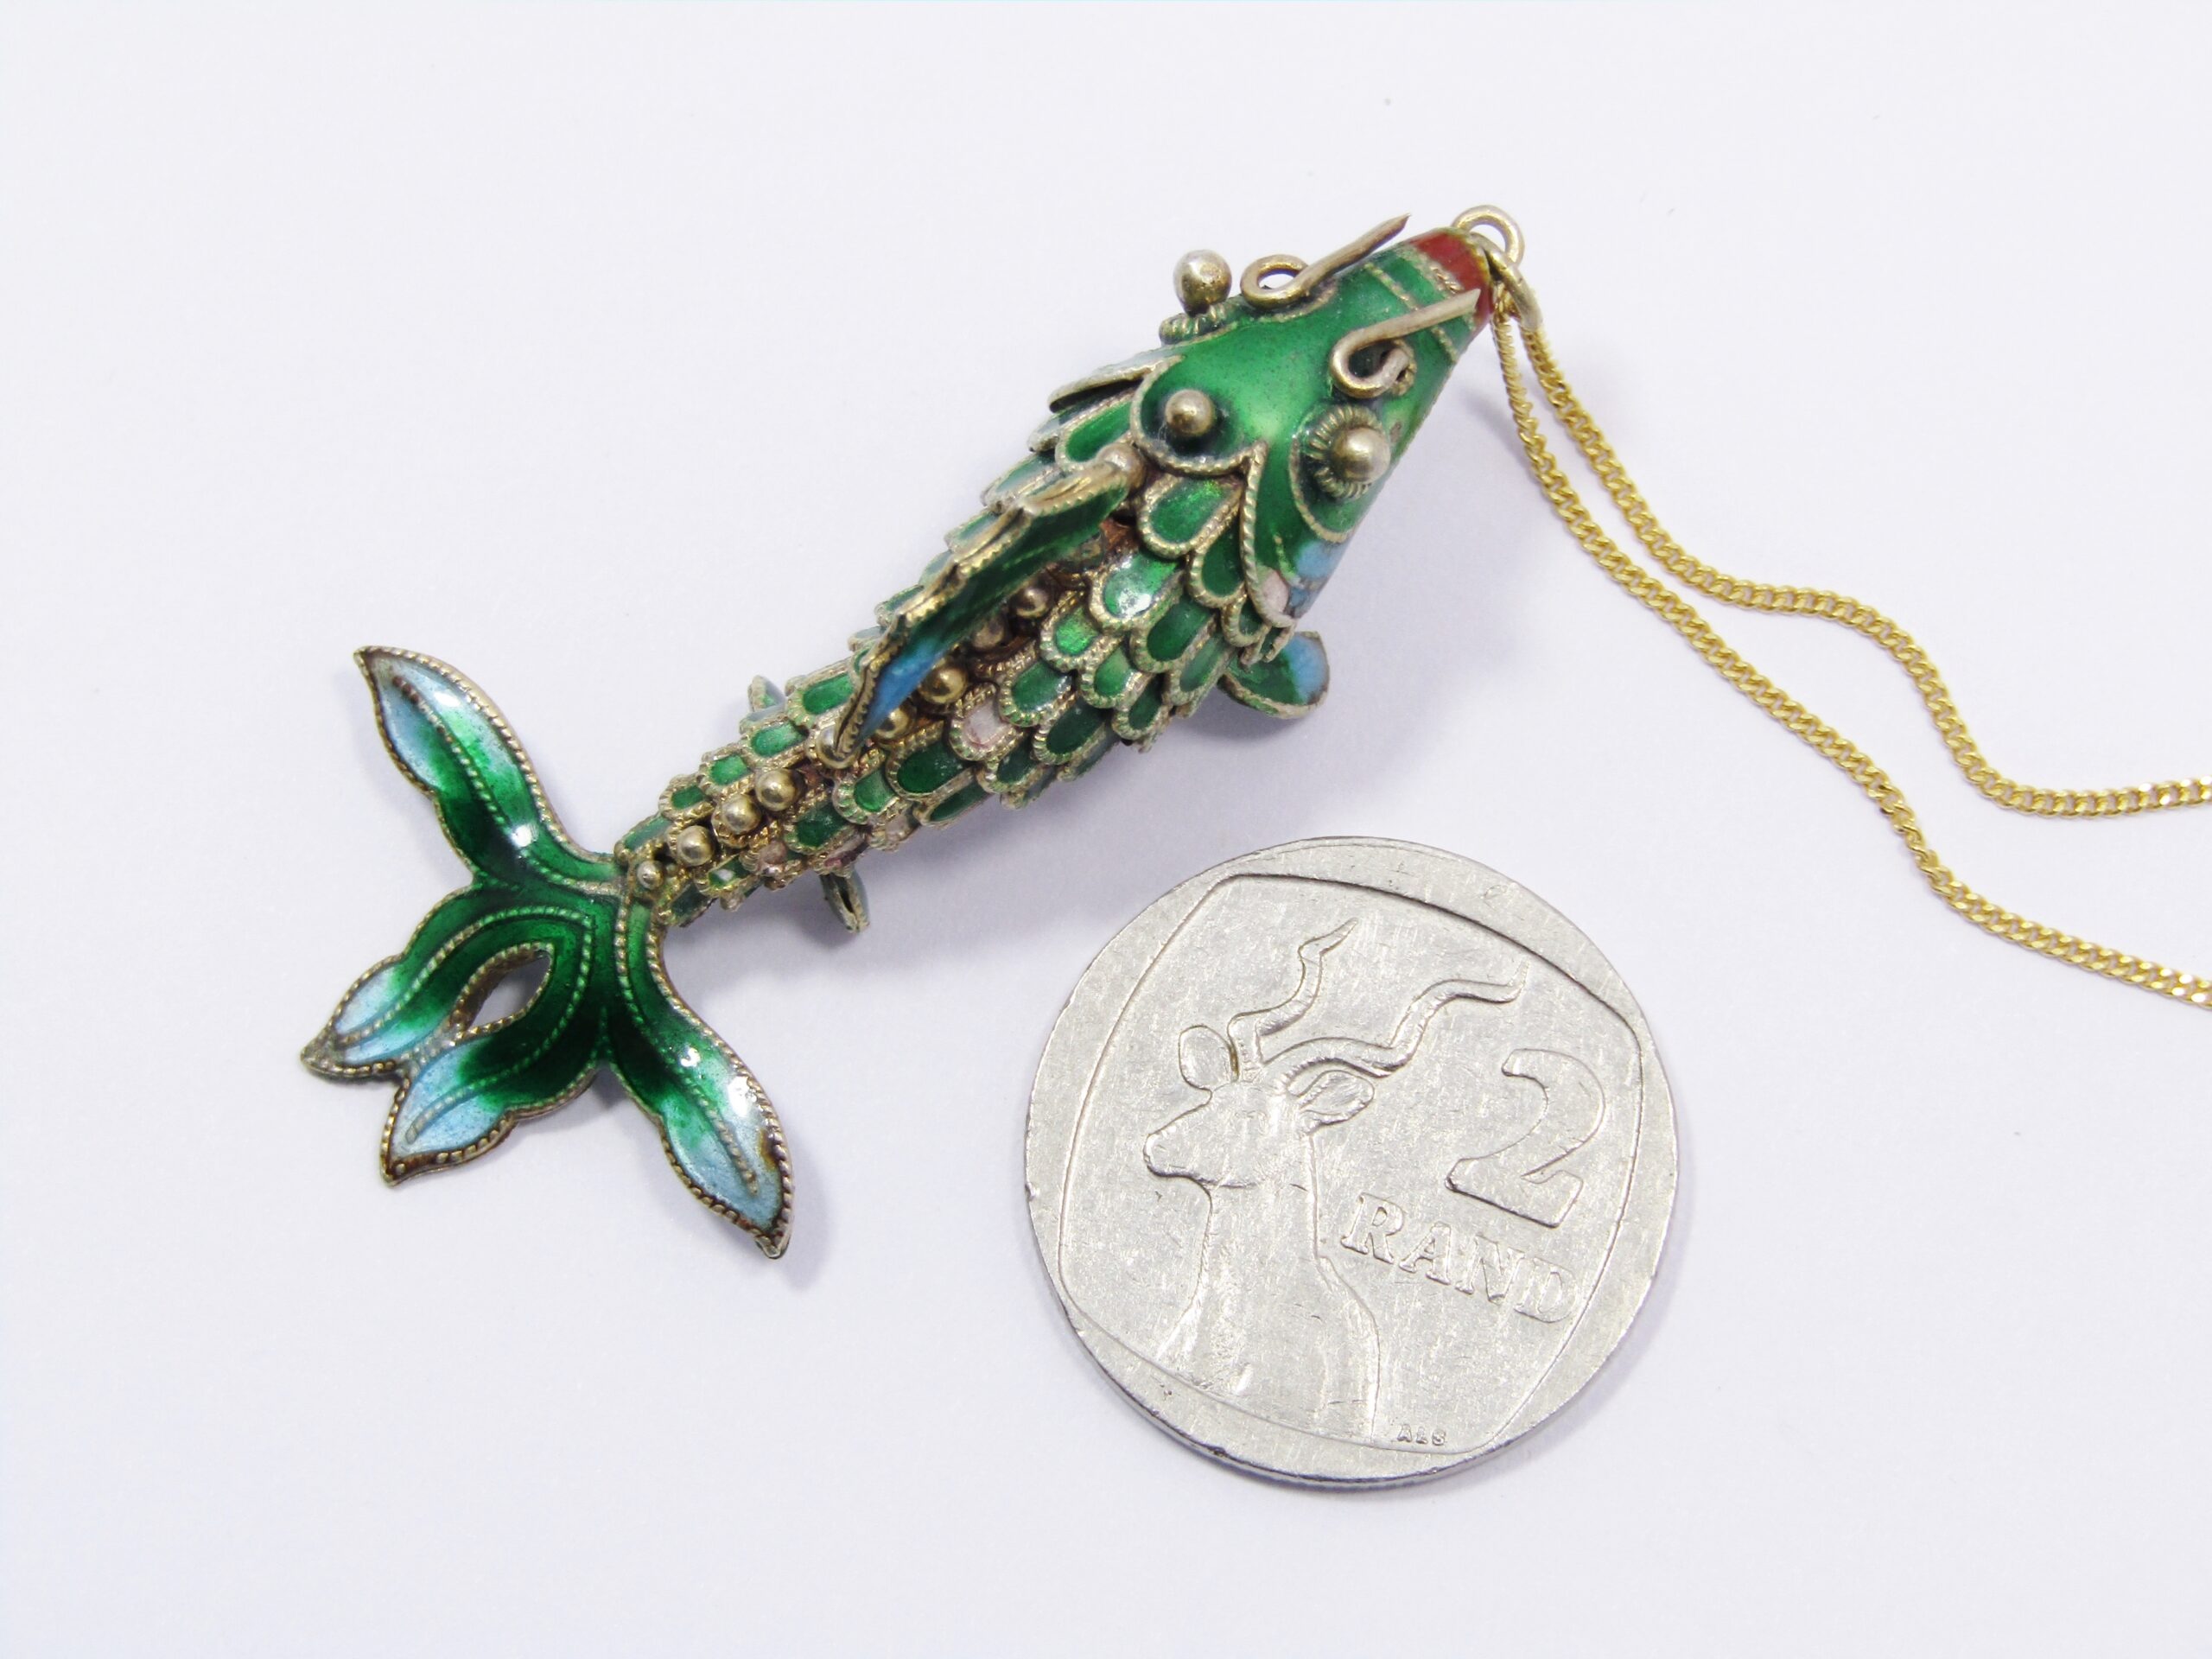 A Stunning Medium Size Gold Gilt Articulated Fish Pendant over Sterling Silver